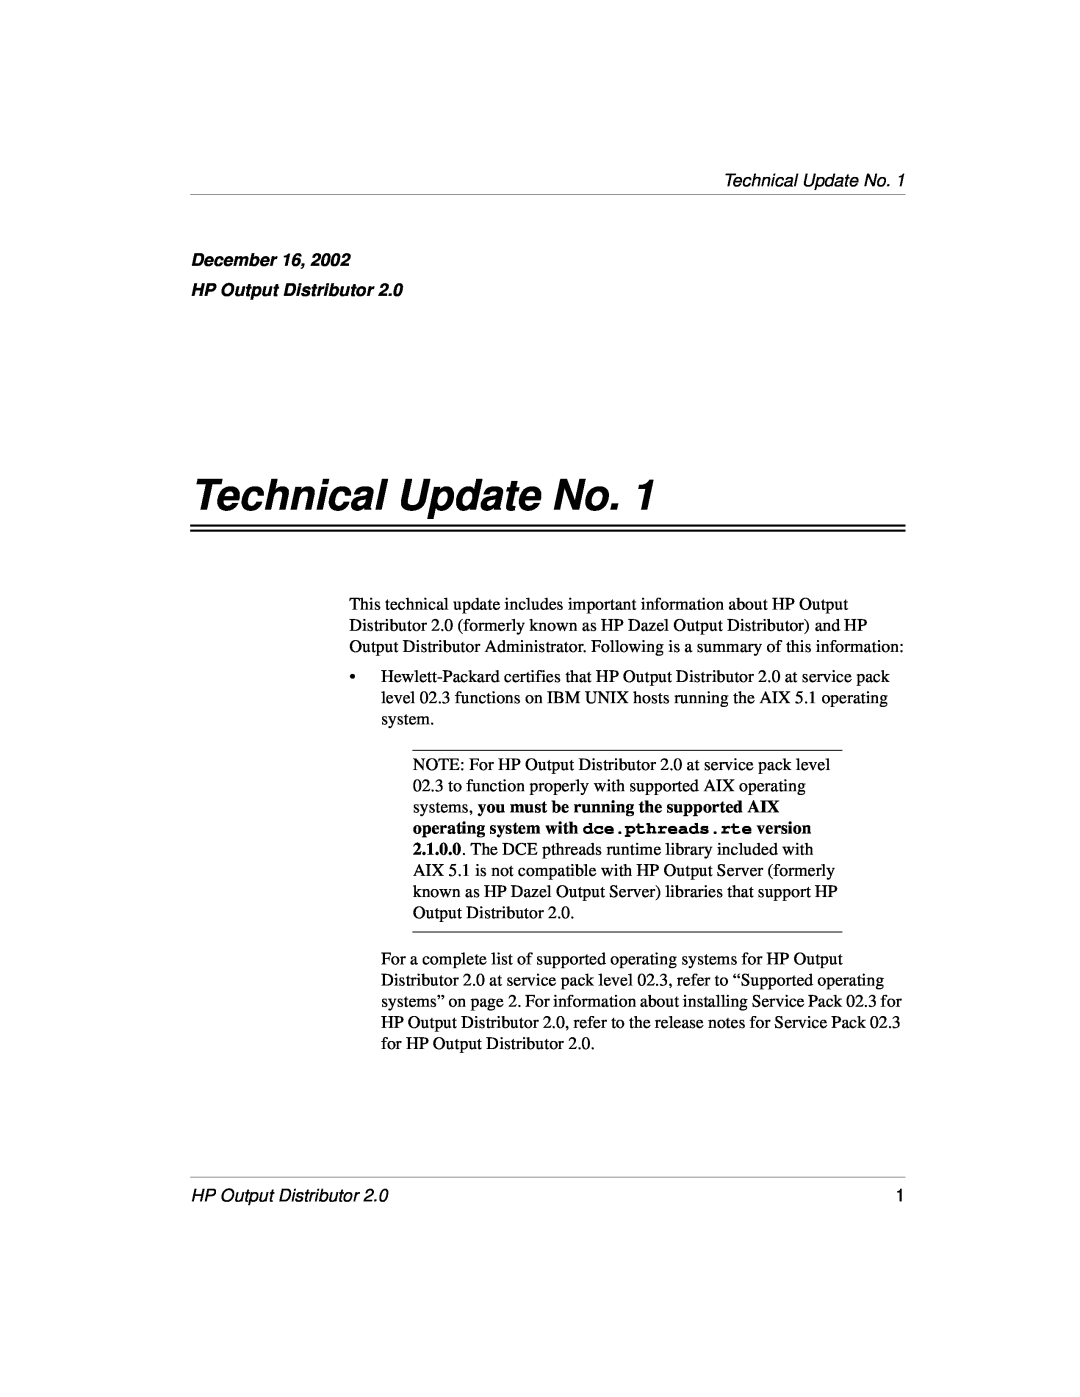 HP Output Management Services Software manual Technical Update No, HP Output Distributor 